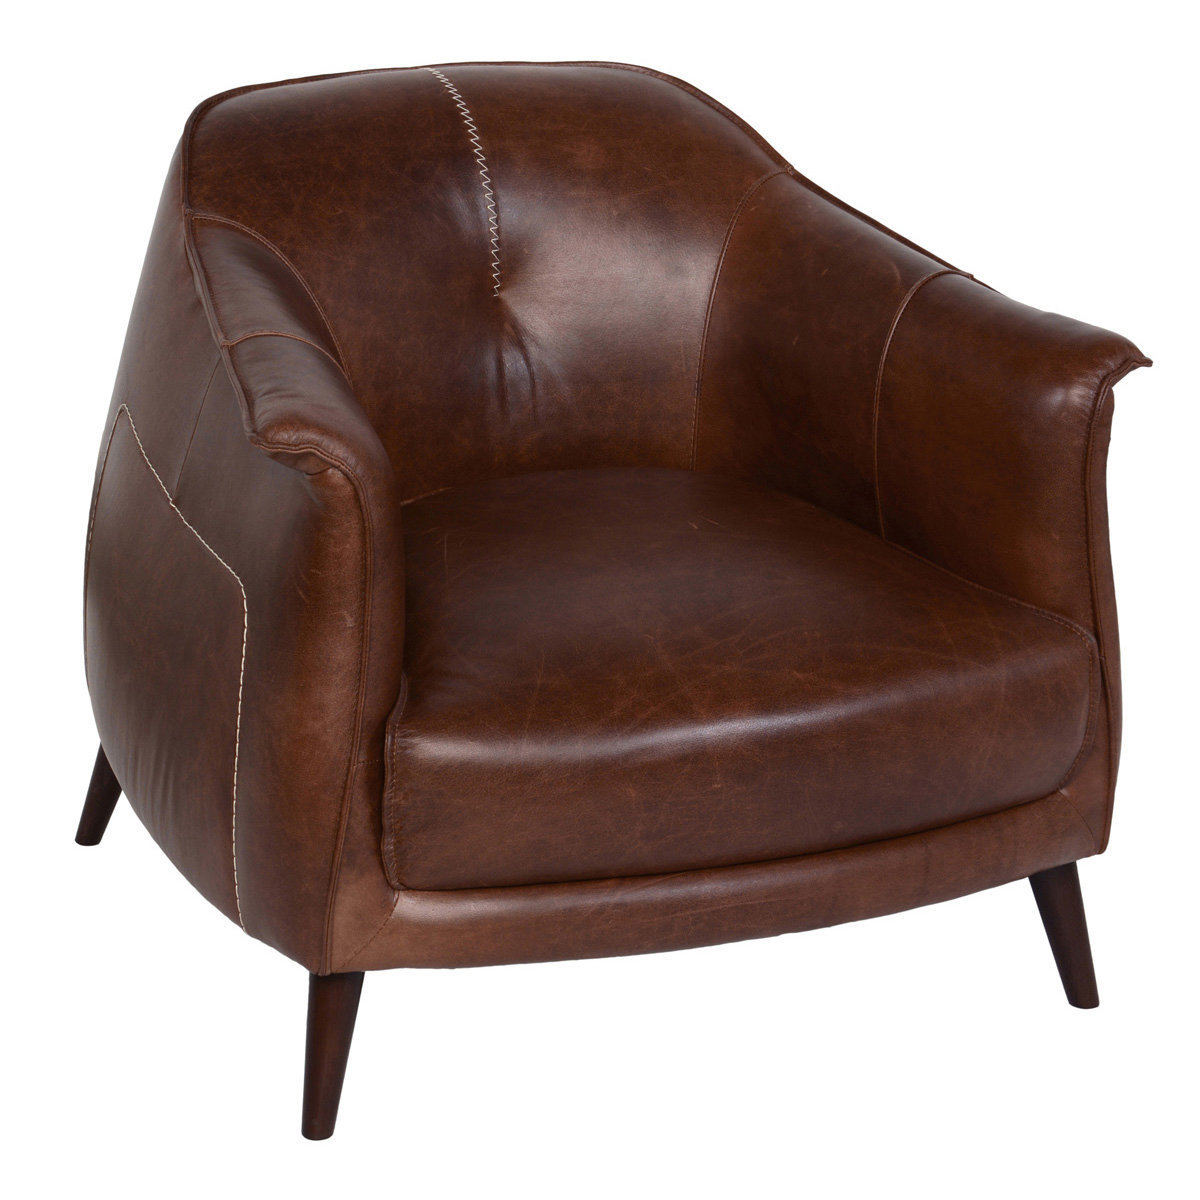 Leather Club Chair for added appeal